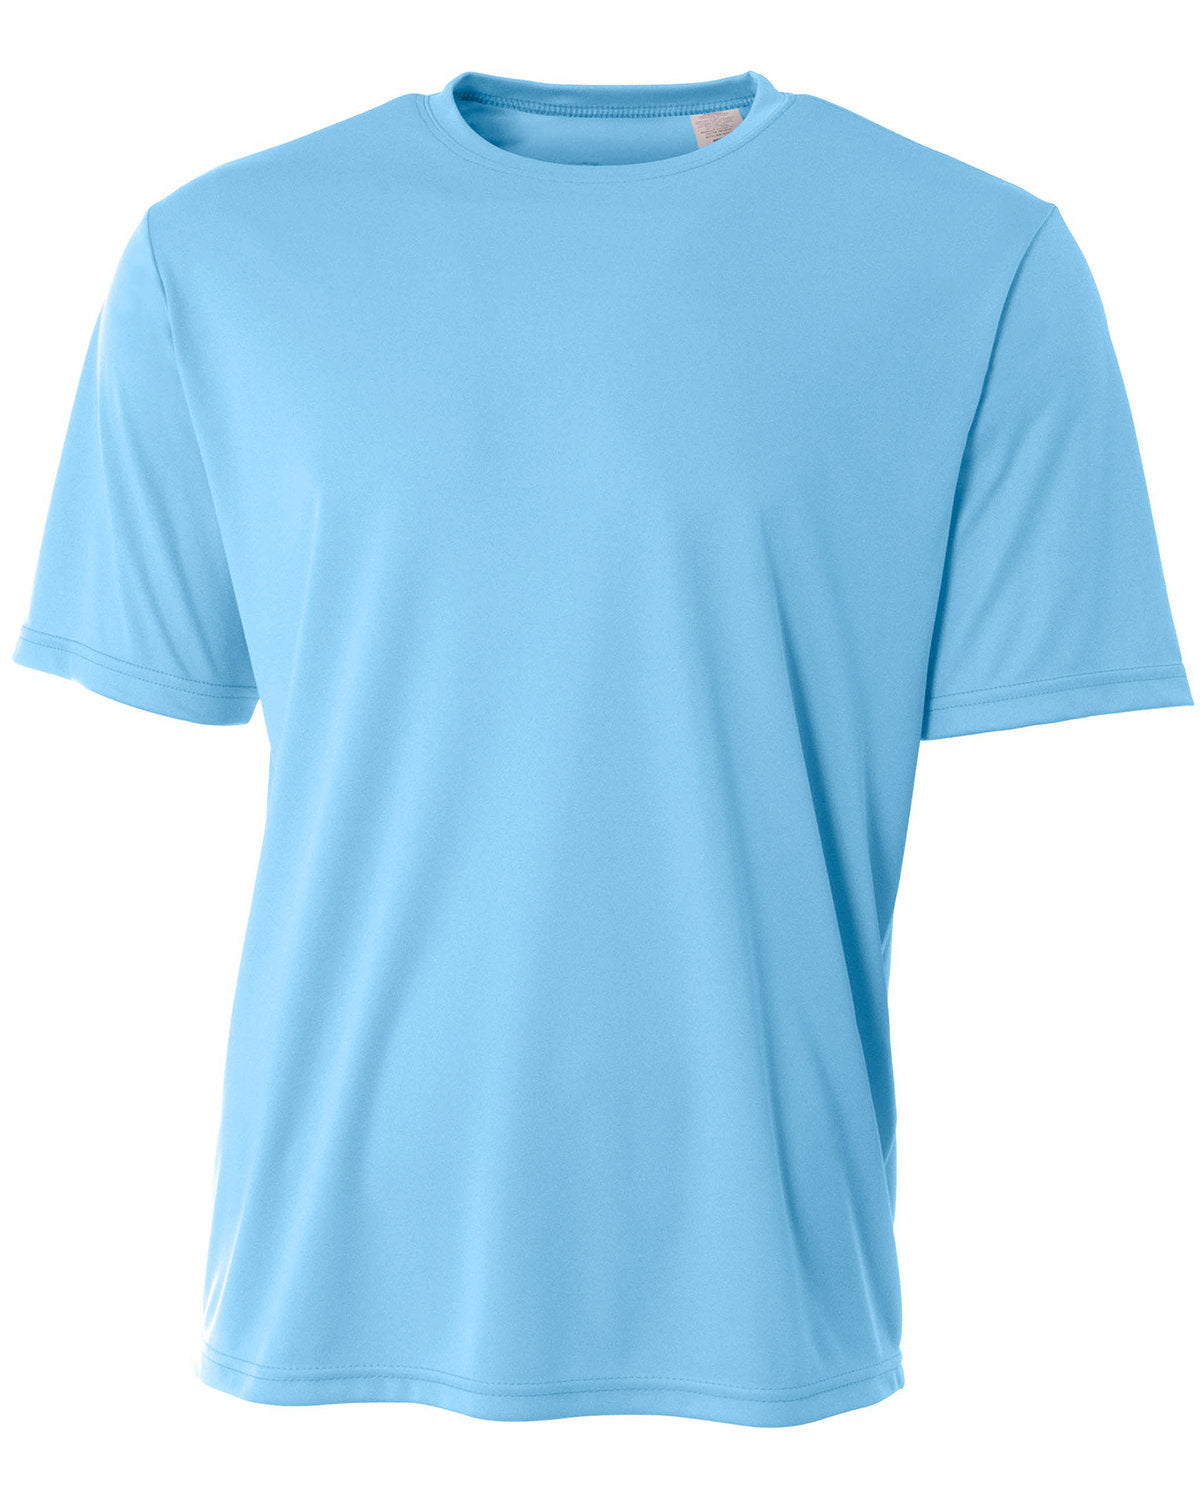 A4 Men's Sprint Performance T-Shirt: Speed and Comfort Combined